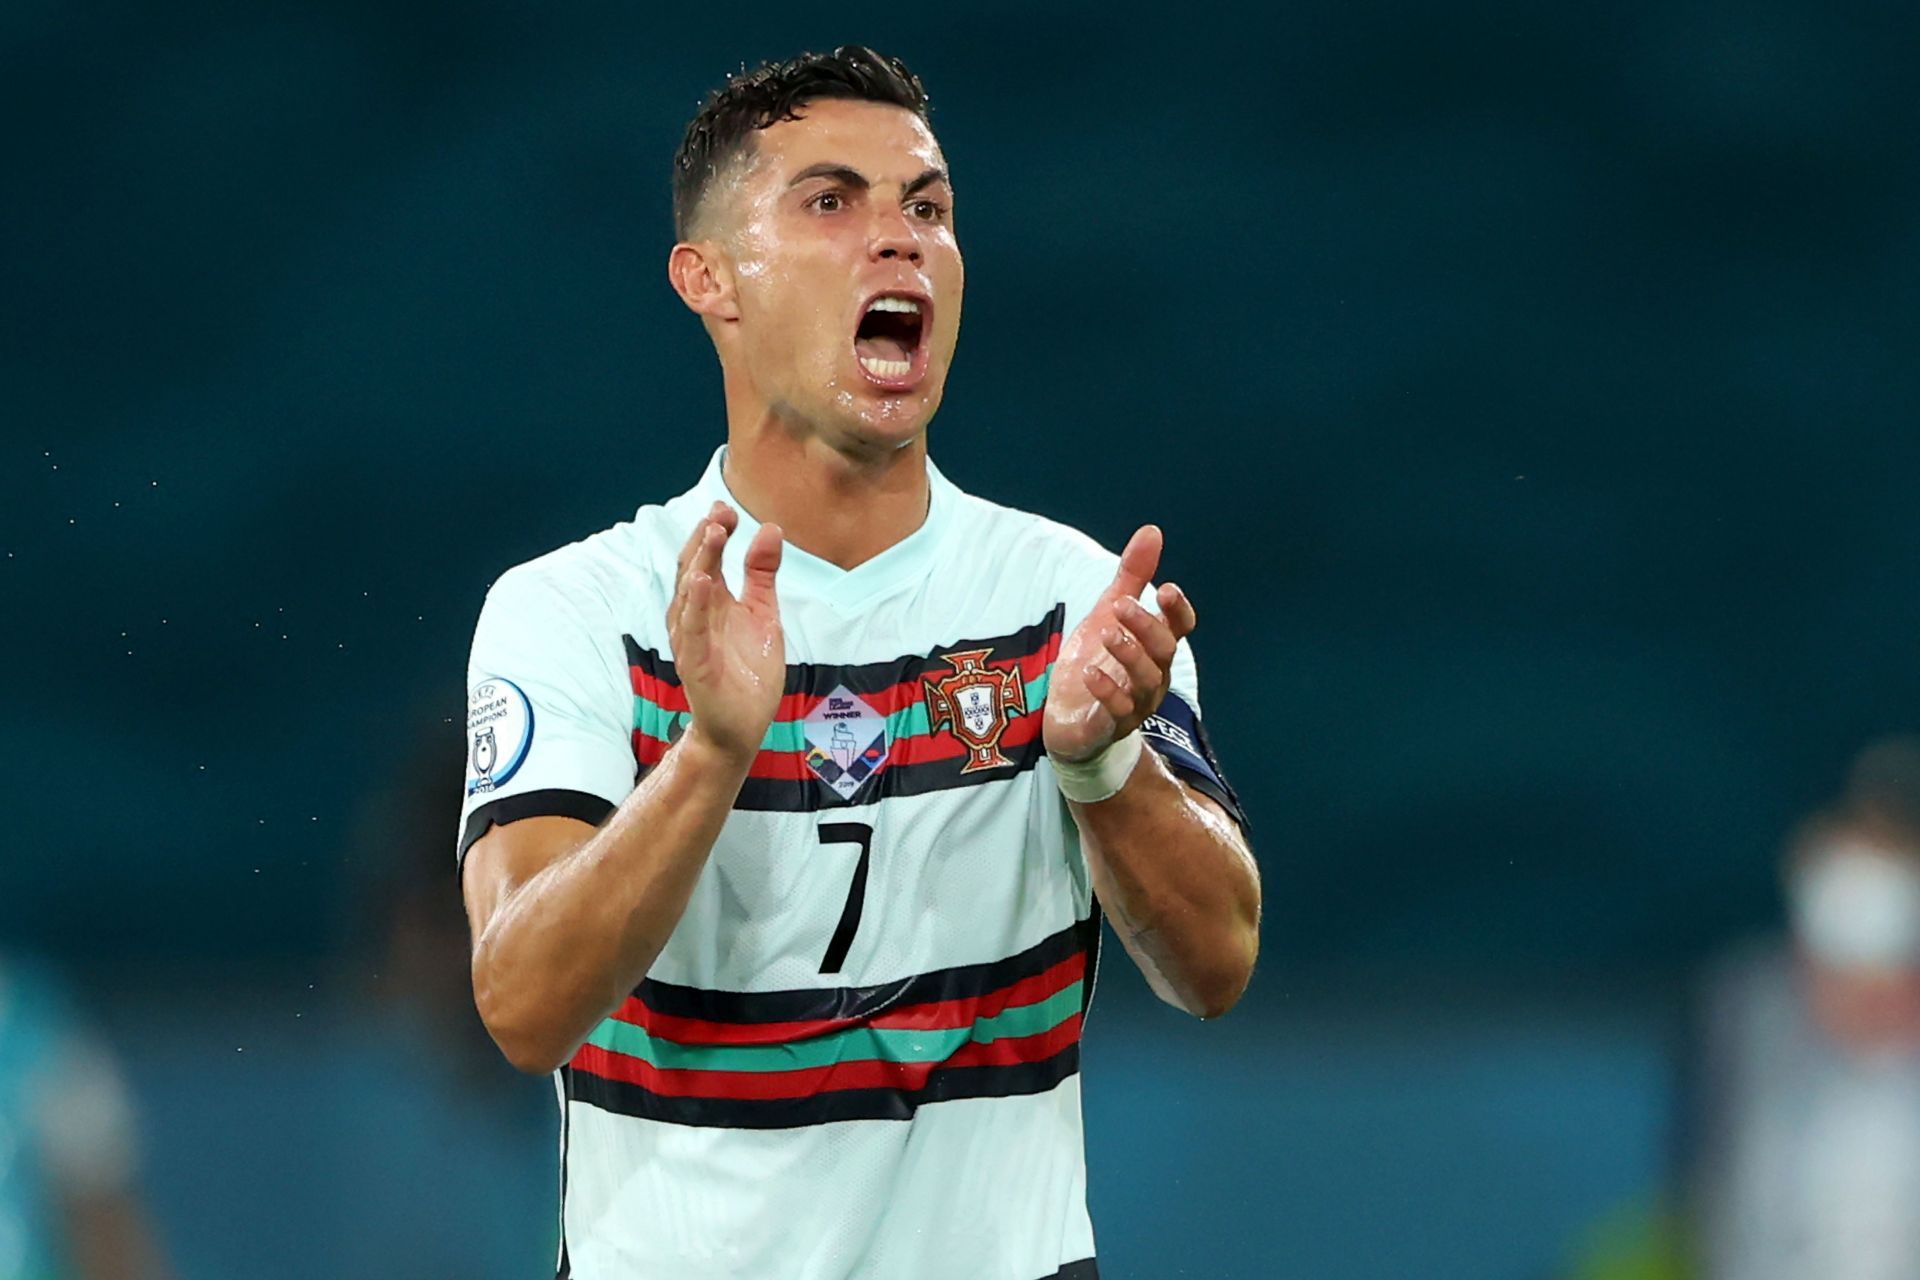 Cristiano Ronaldo posted a heartfelt message on Instagram after Portugal&#039;s loss against Sweden.